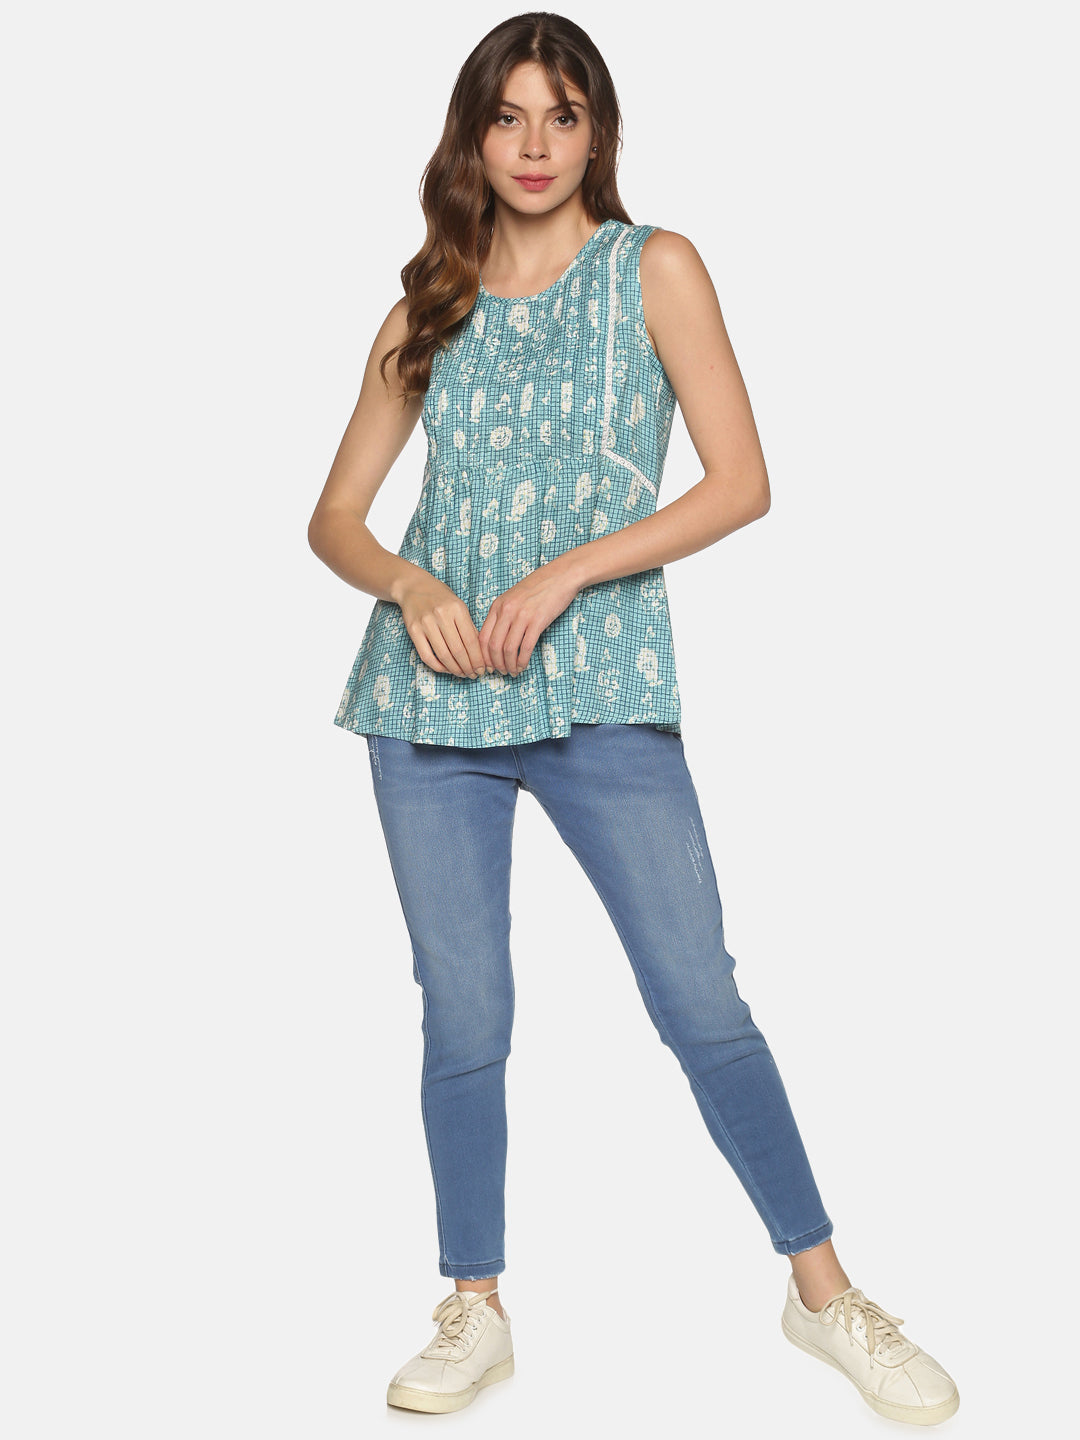 Blue Floral Printed Top with Pleats & Lace Inserts on Front Yoke